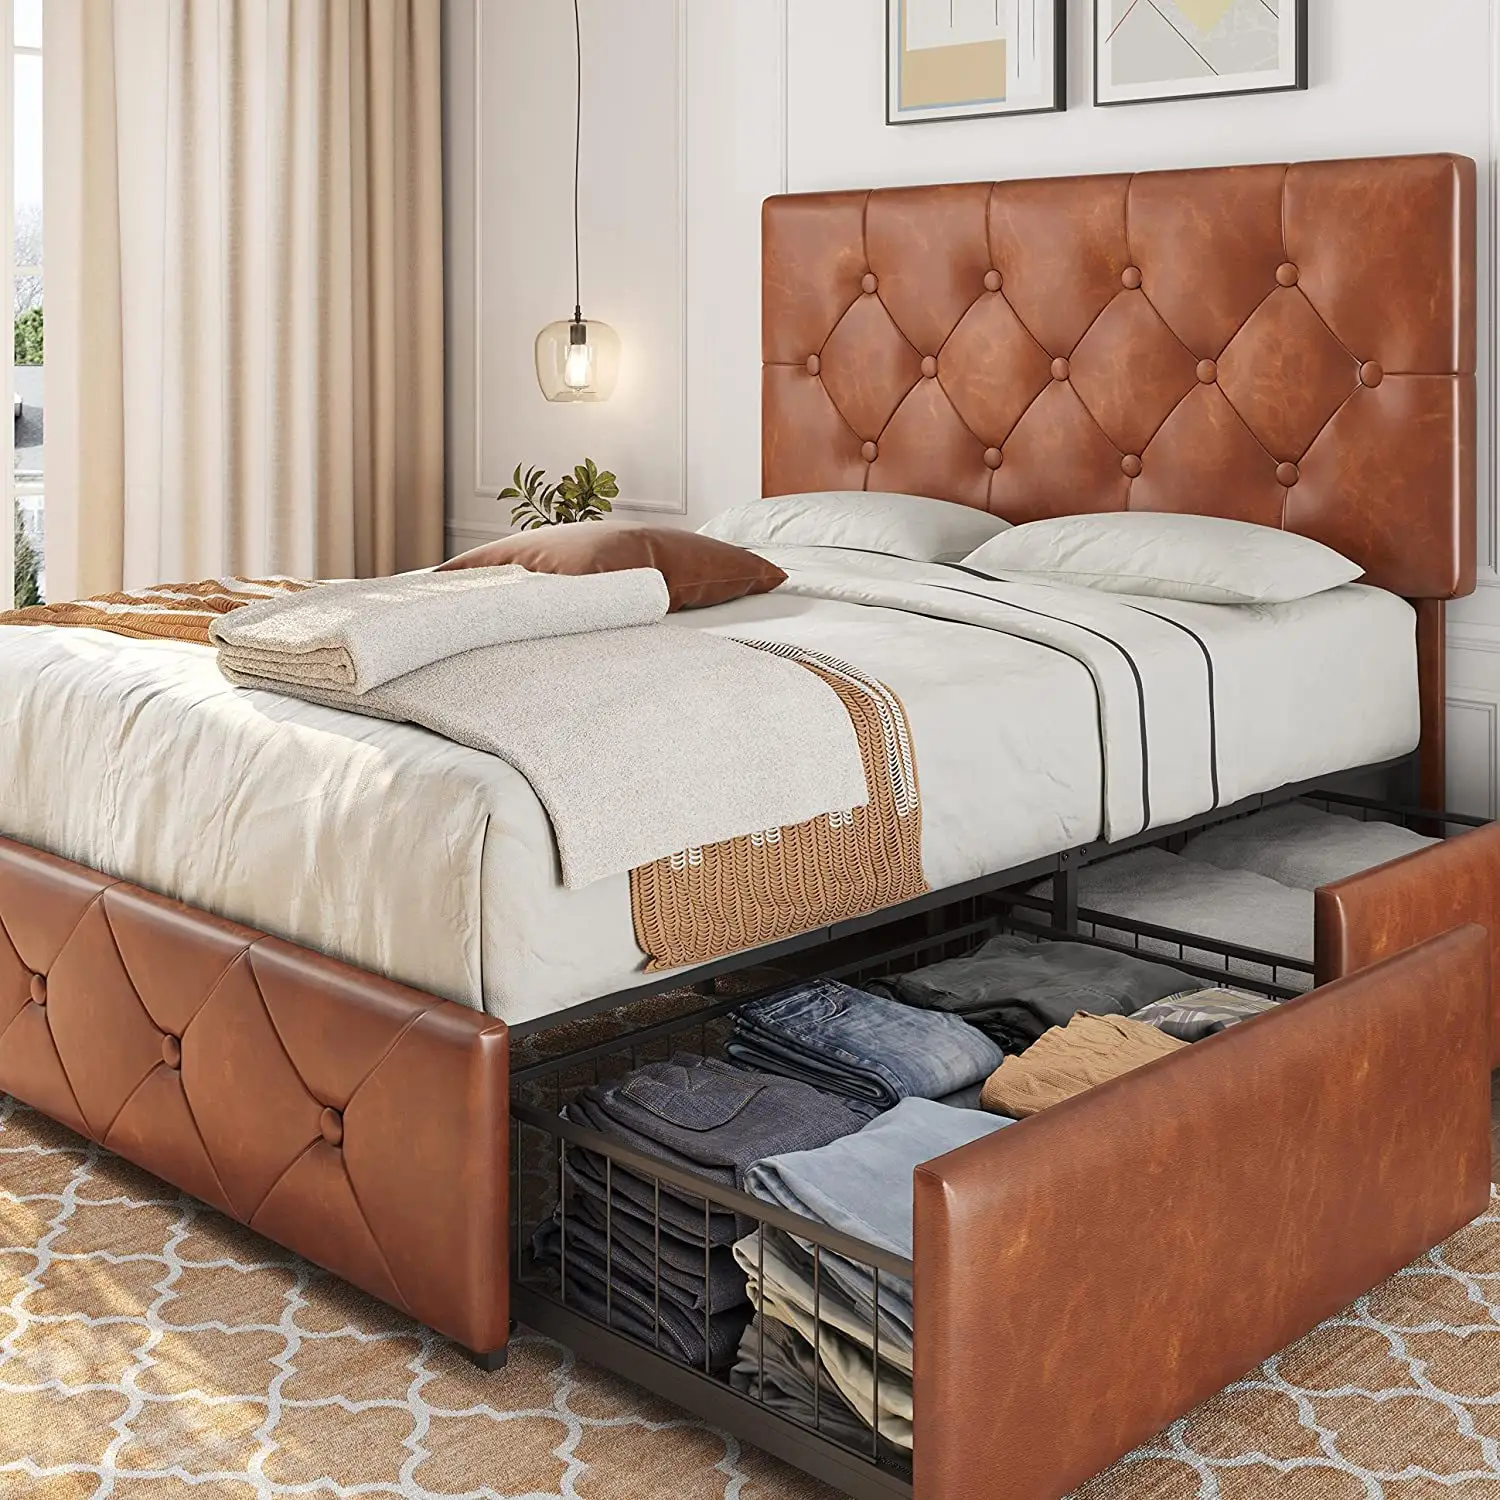 Kainice bedroom furniture drawer storage king size italian leather beds luxury modern upholstered bed frame for home